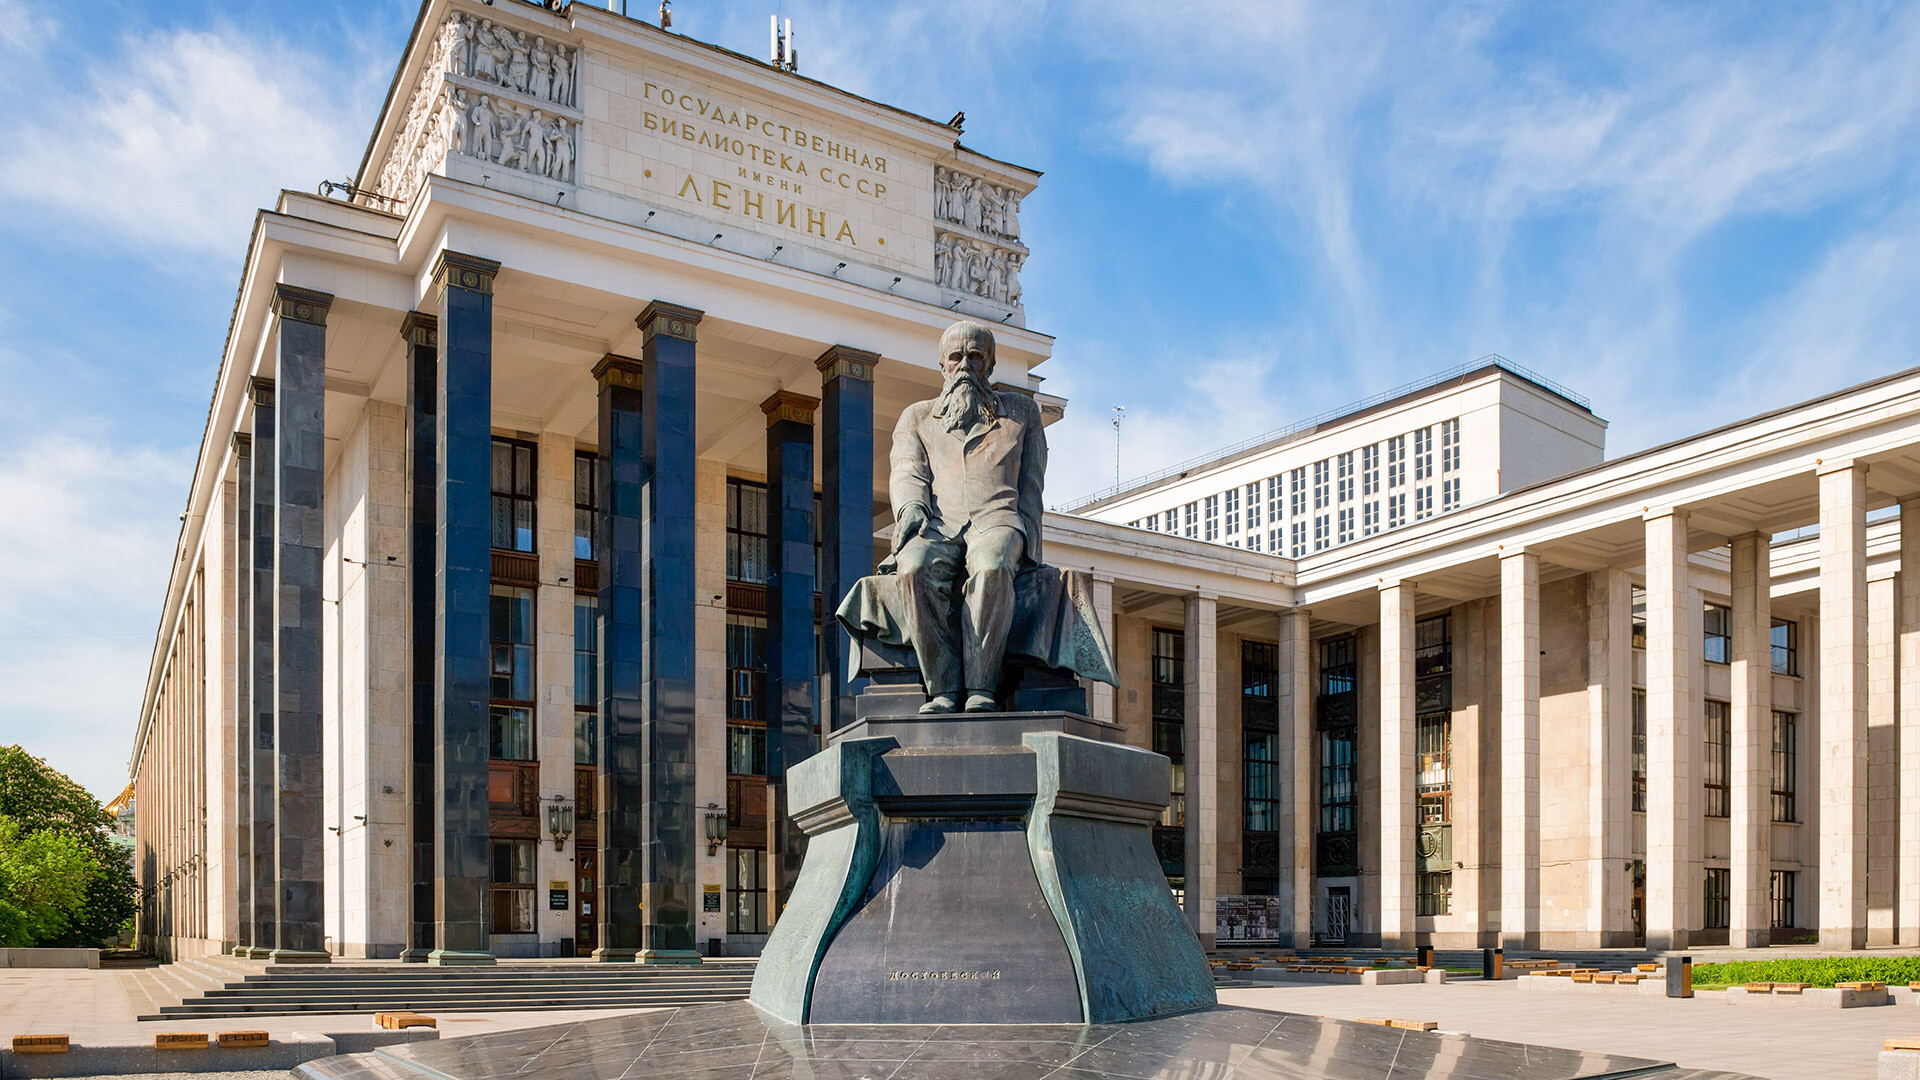 The Russian State Library, and the monument to Fyodor Dostoyevsky in front of it